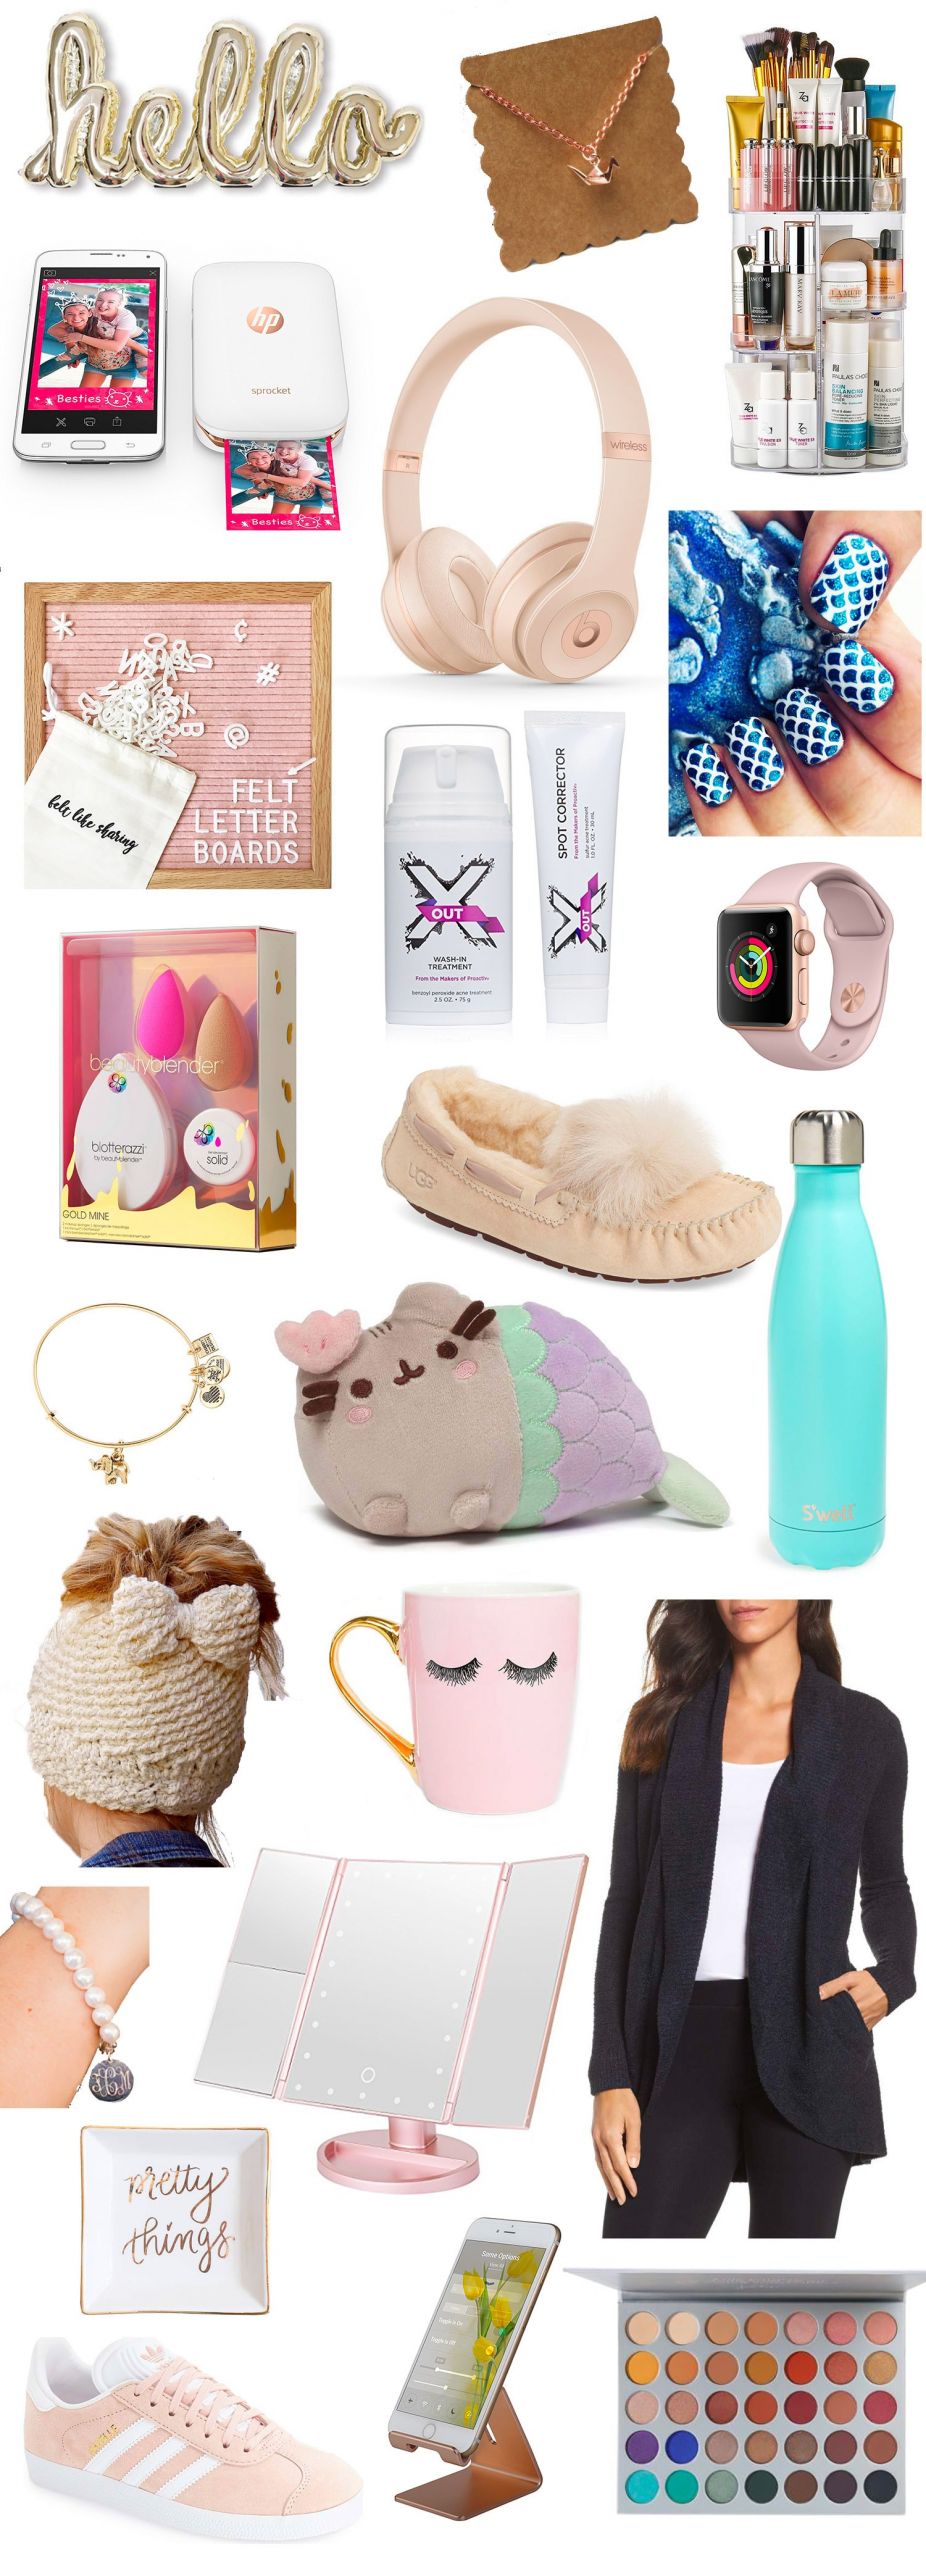 Gift Ideas For Teen Girls
 Top Gifts for Teens This Christmas